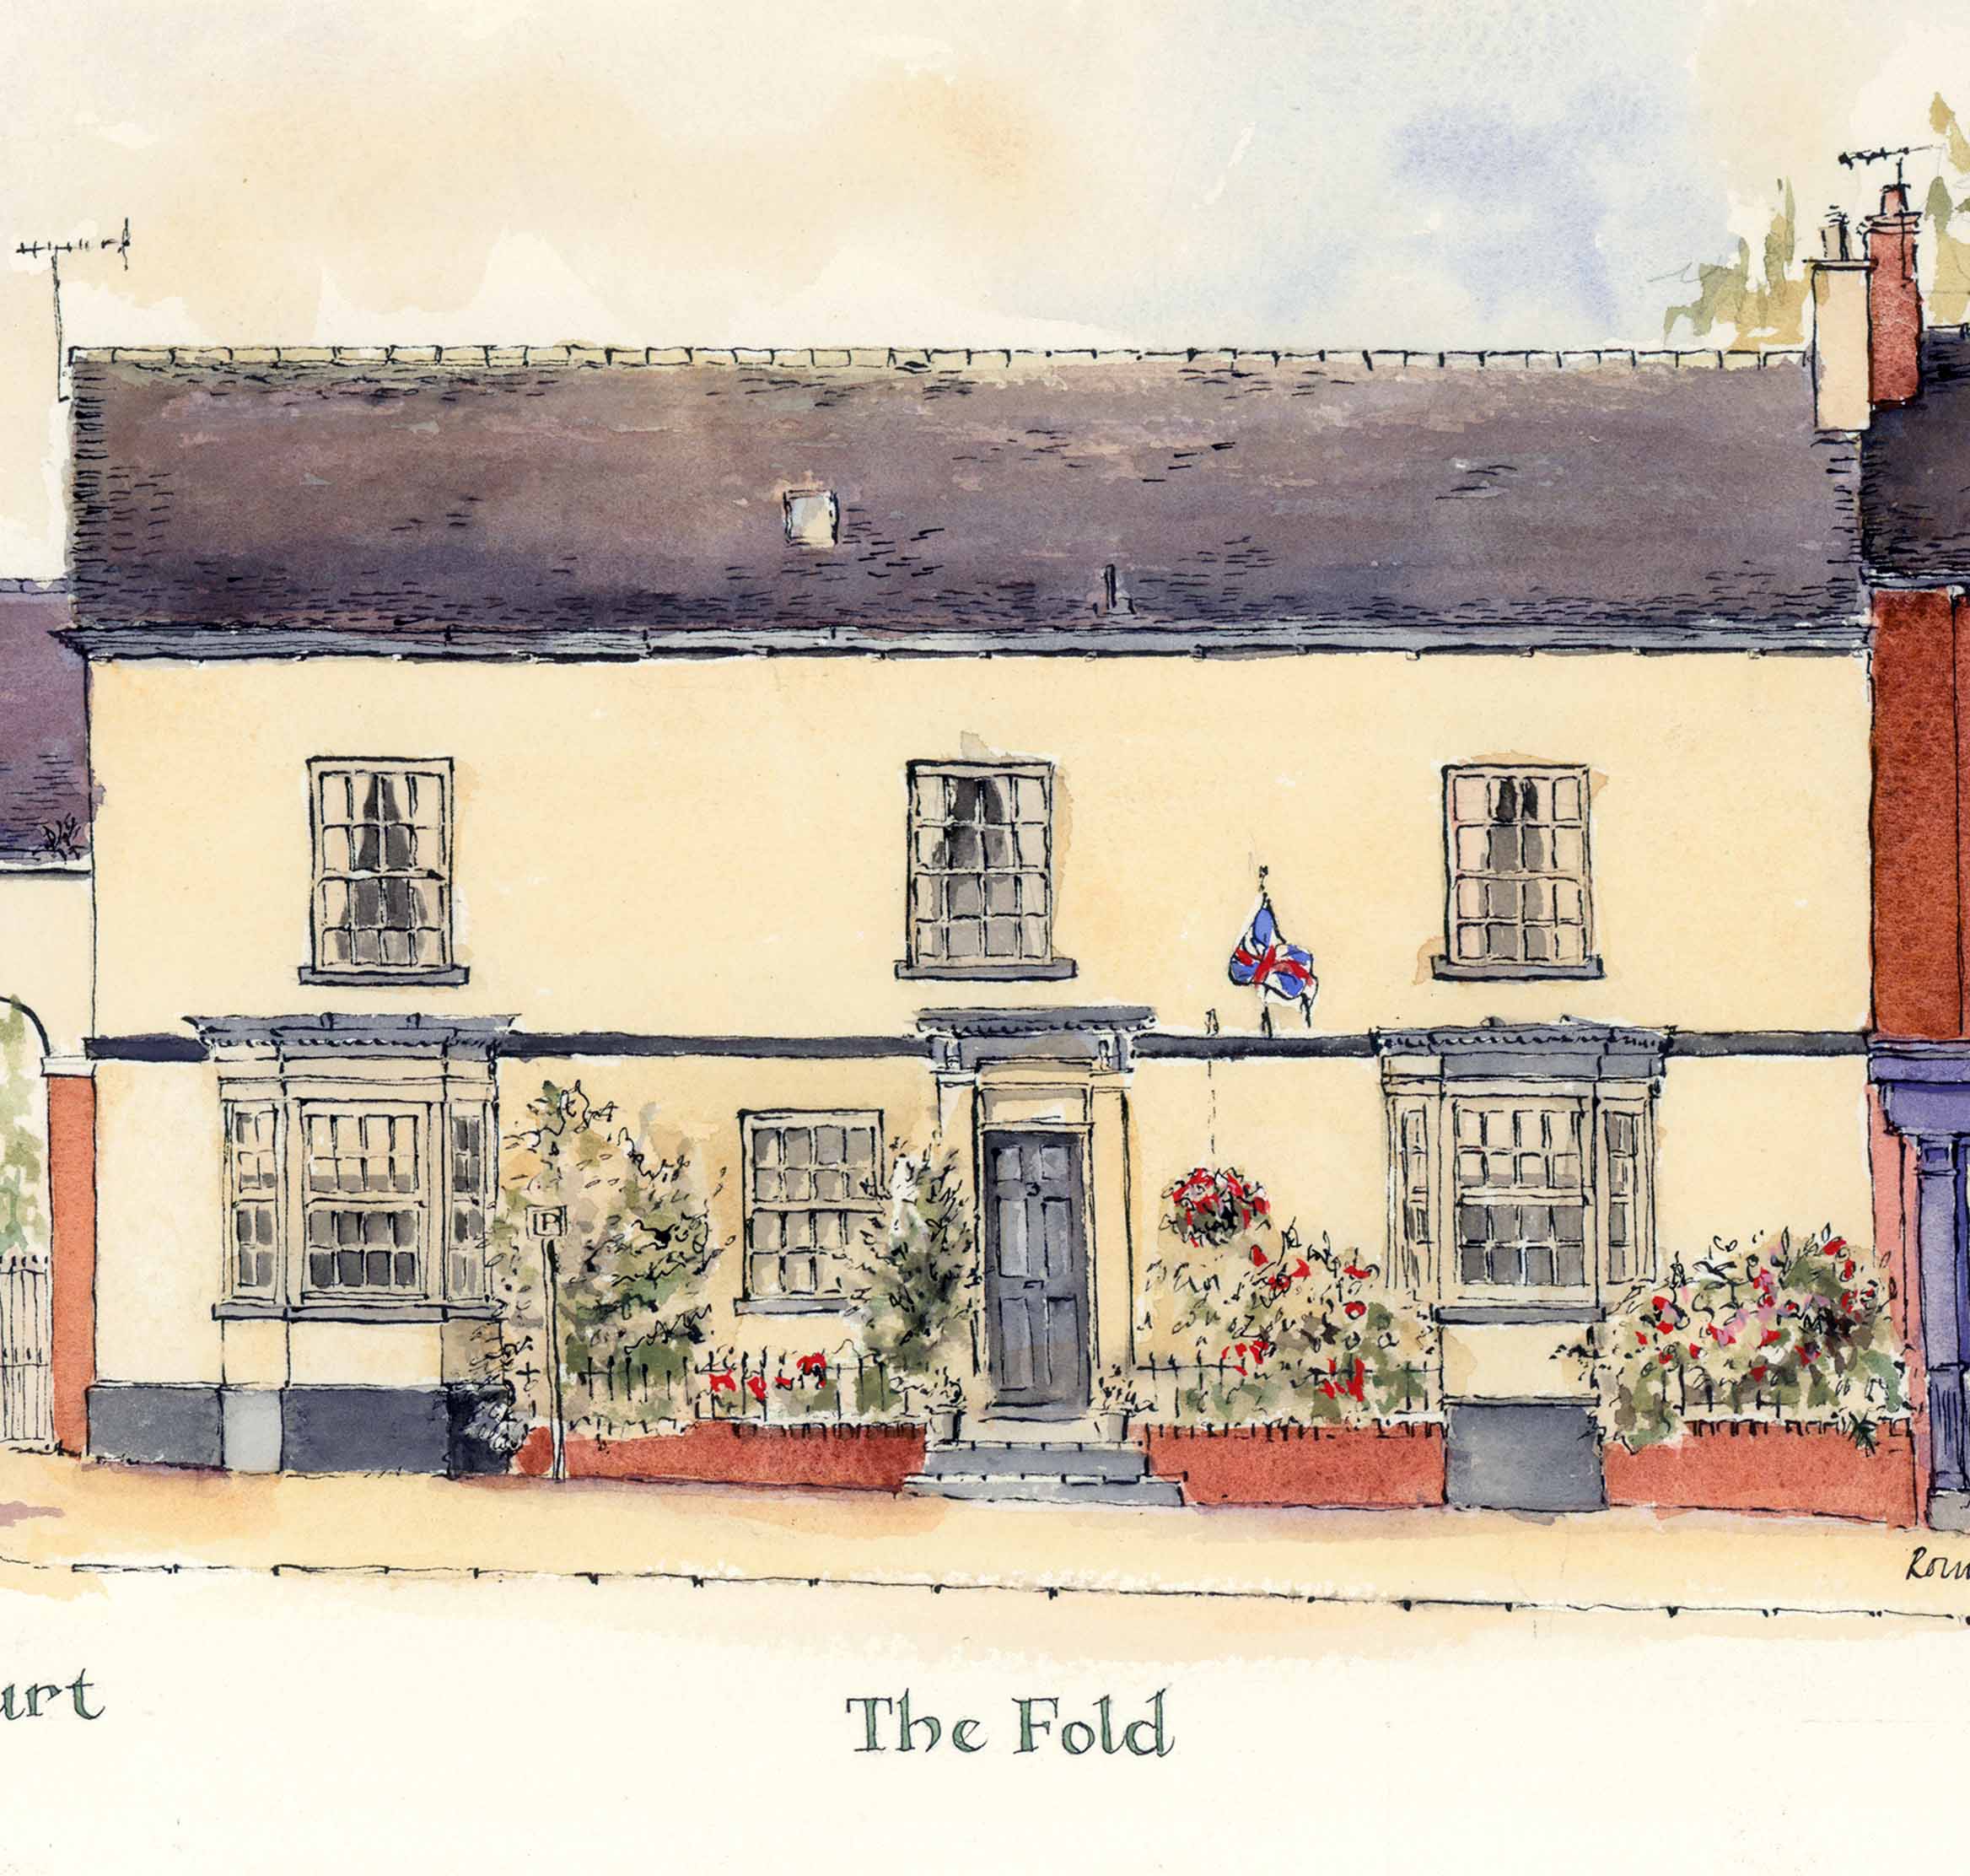 Audlem Cheshire Street the fold